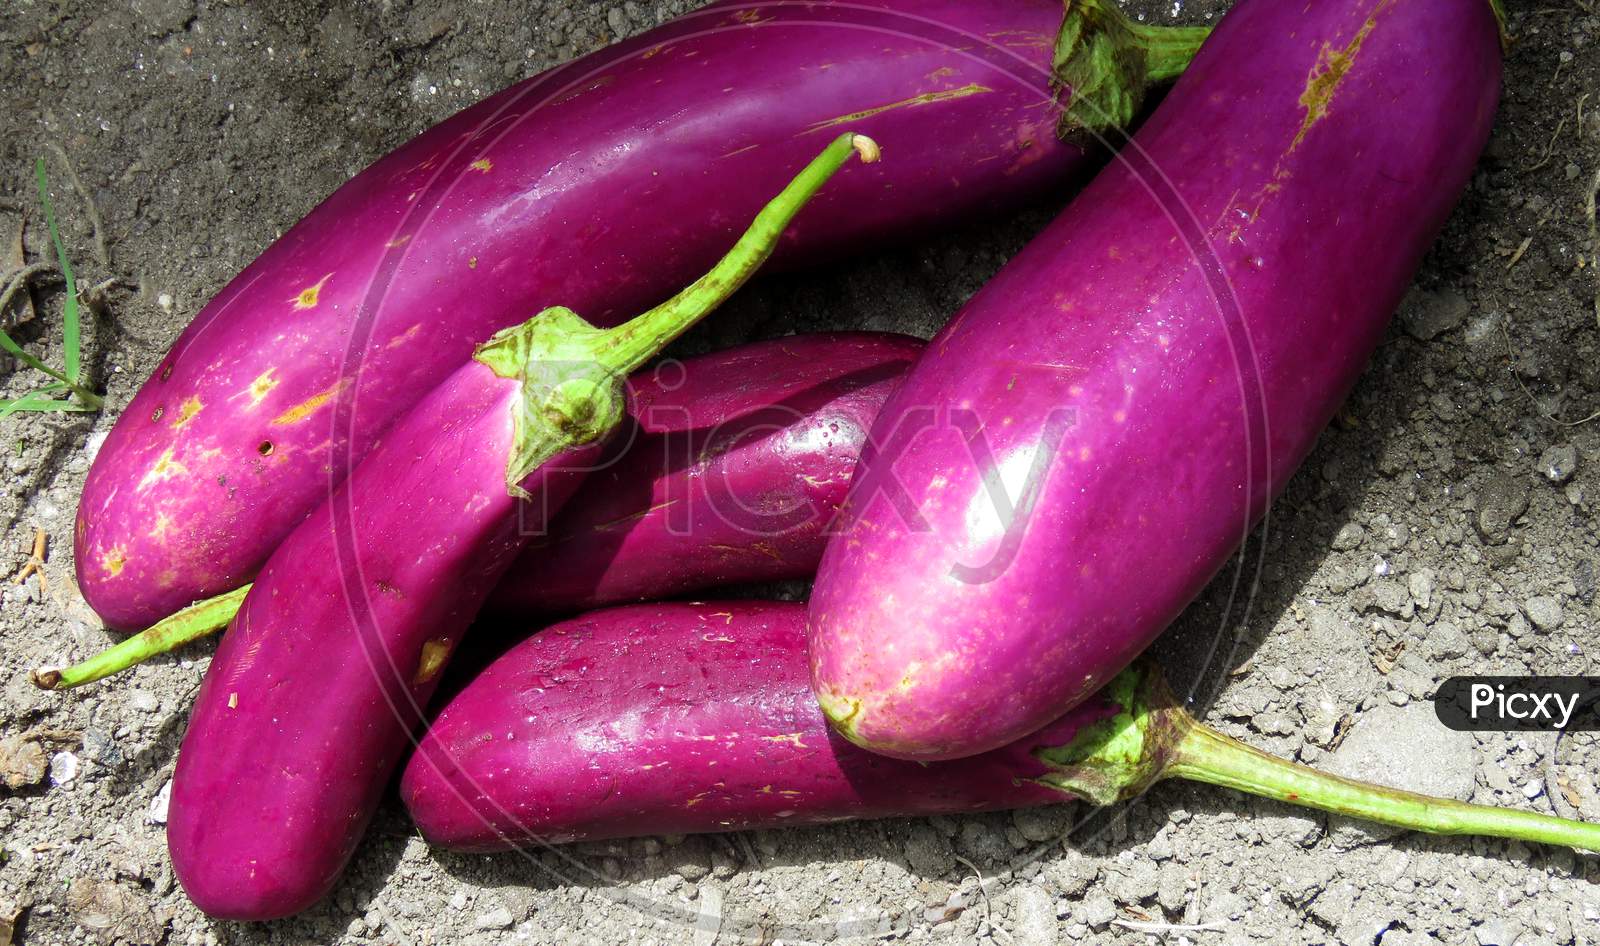 Eggplant, aubergine or brinjal in the Ground,eggplants on the field,Isolated Eggplant.